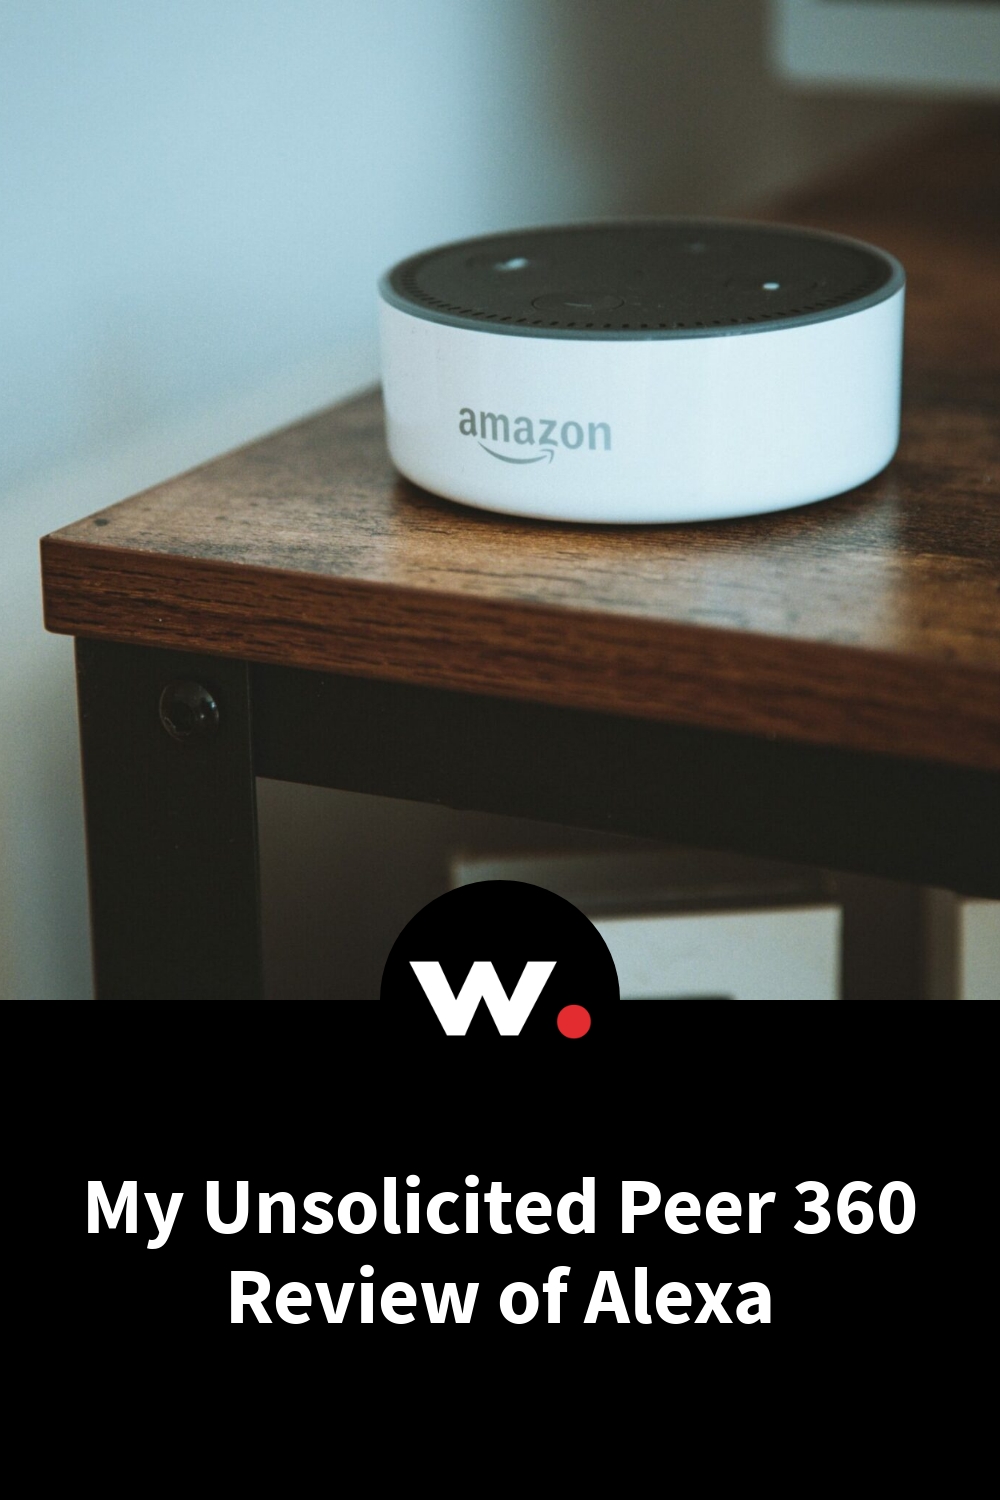 My Unsolicited Peer 360 Review of Alexa